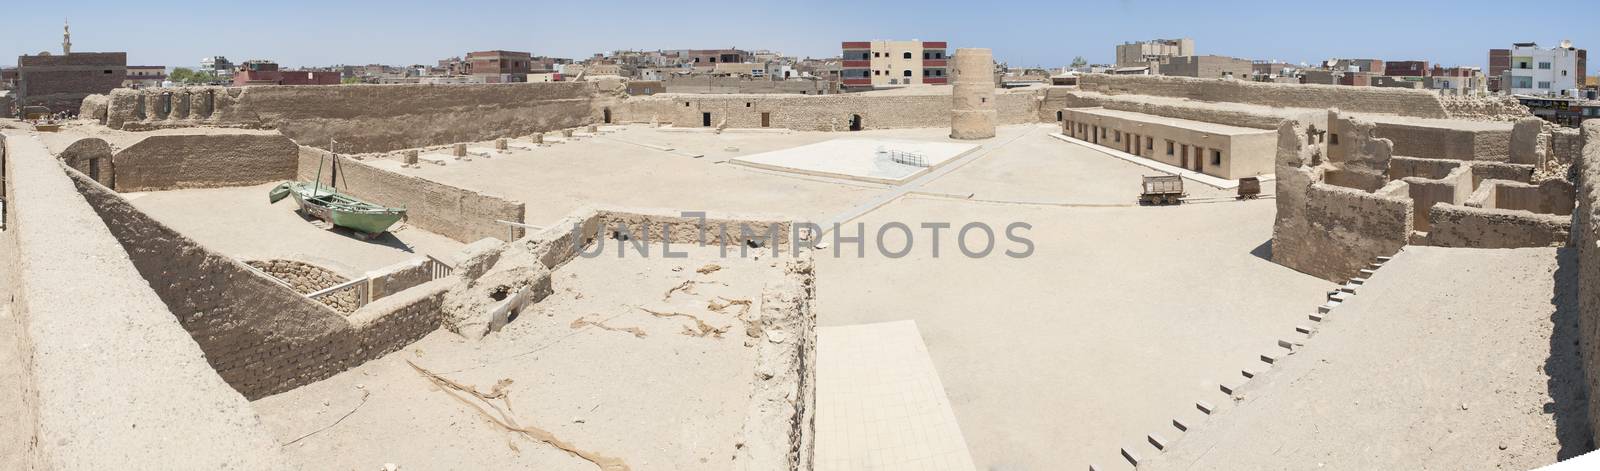 Panoramic landscape view of old ottoman fort in egyptian town of el quseir